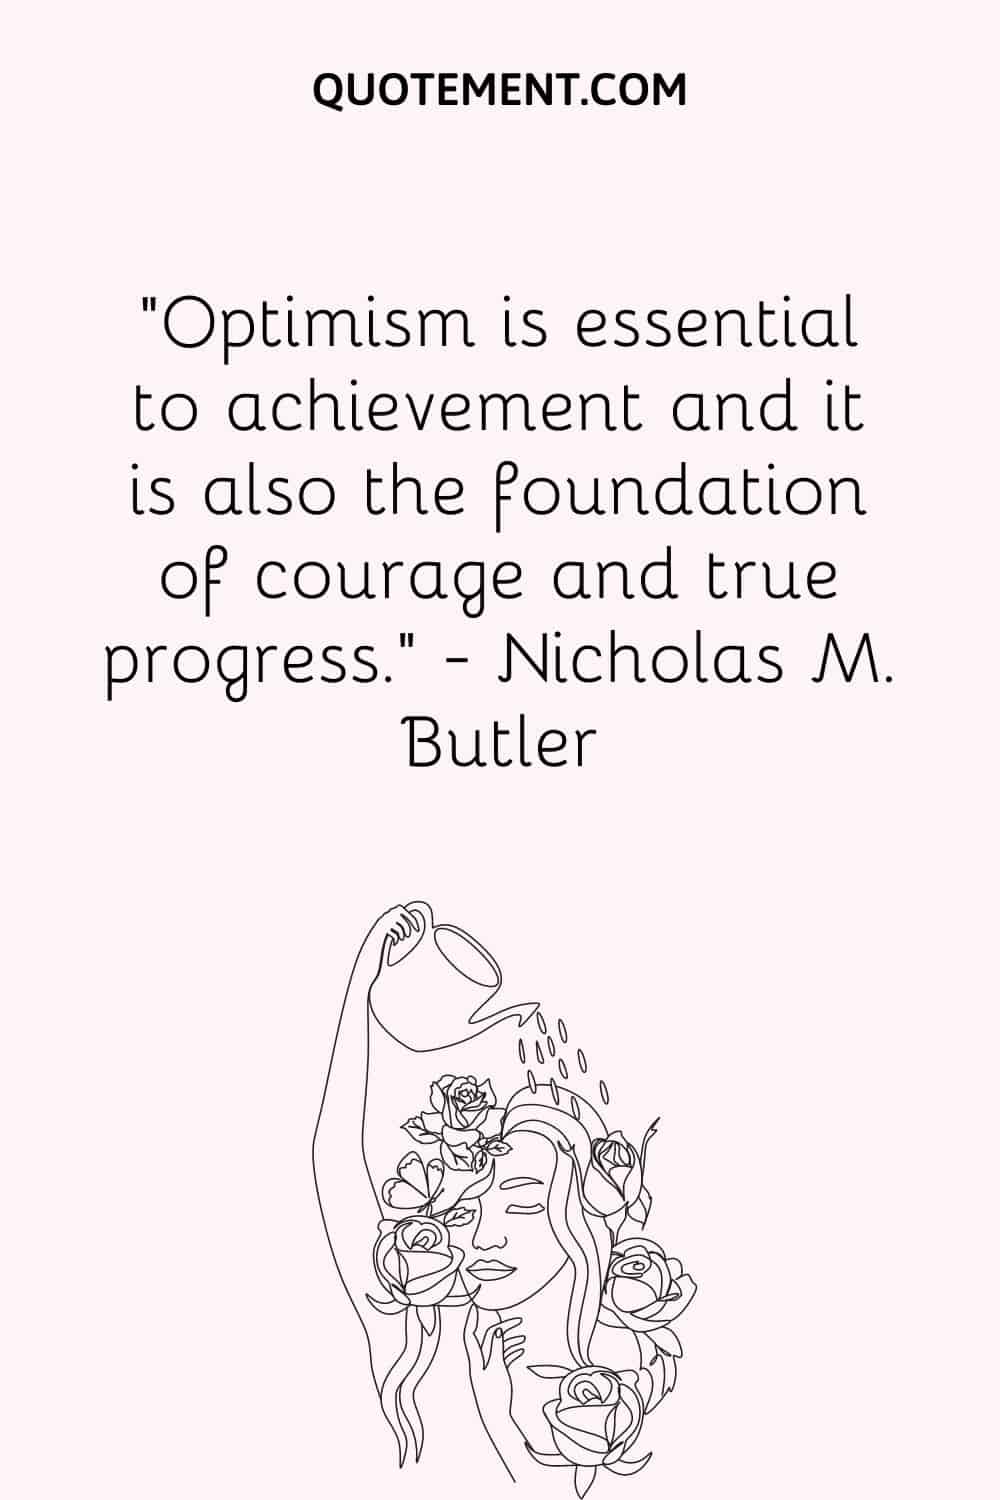 Optimism is essential to achievement and it is also the foundation of courage and true progress